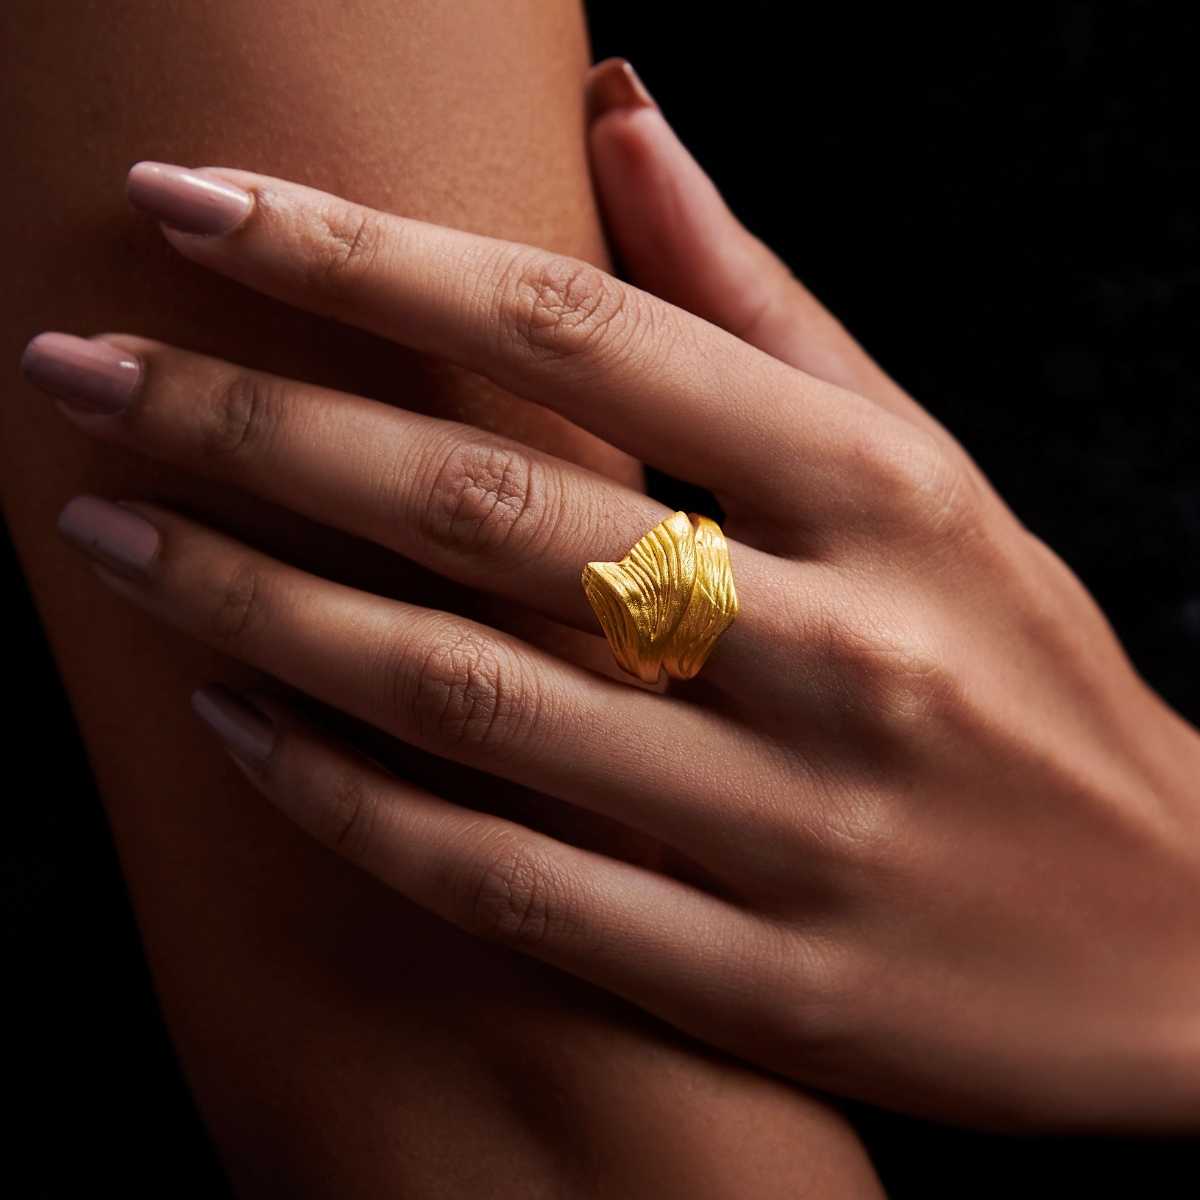 Bold in Gold Goldtone Statement Ring